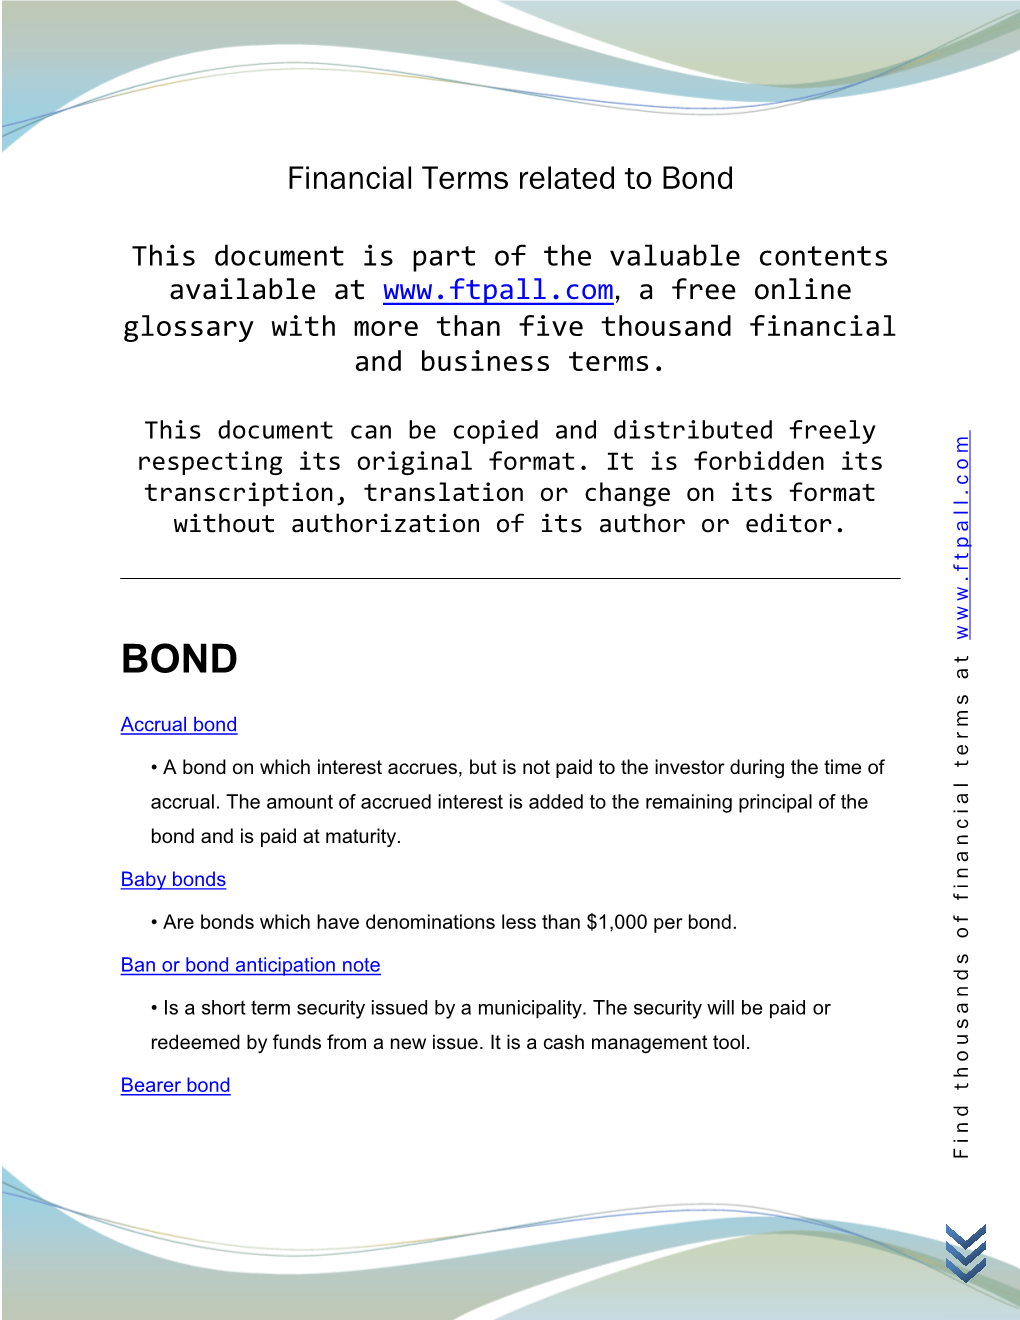 Financial Terms Related to Bond